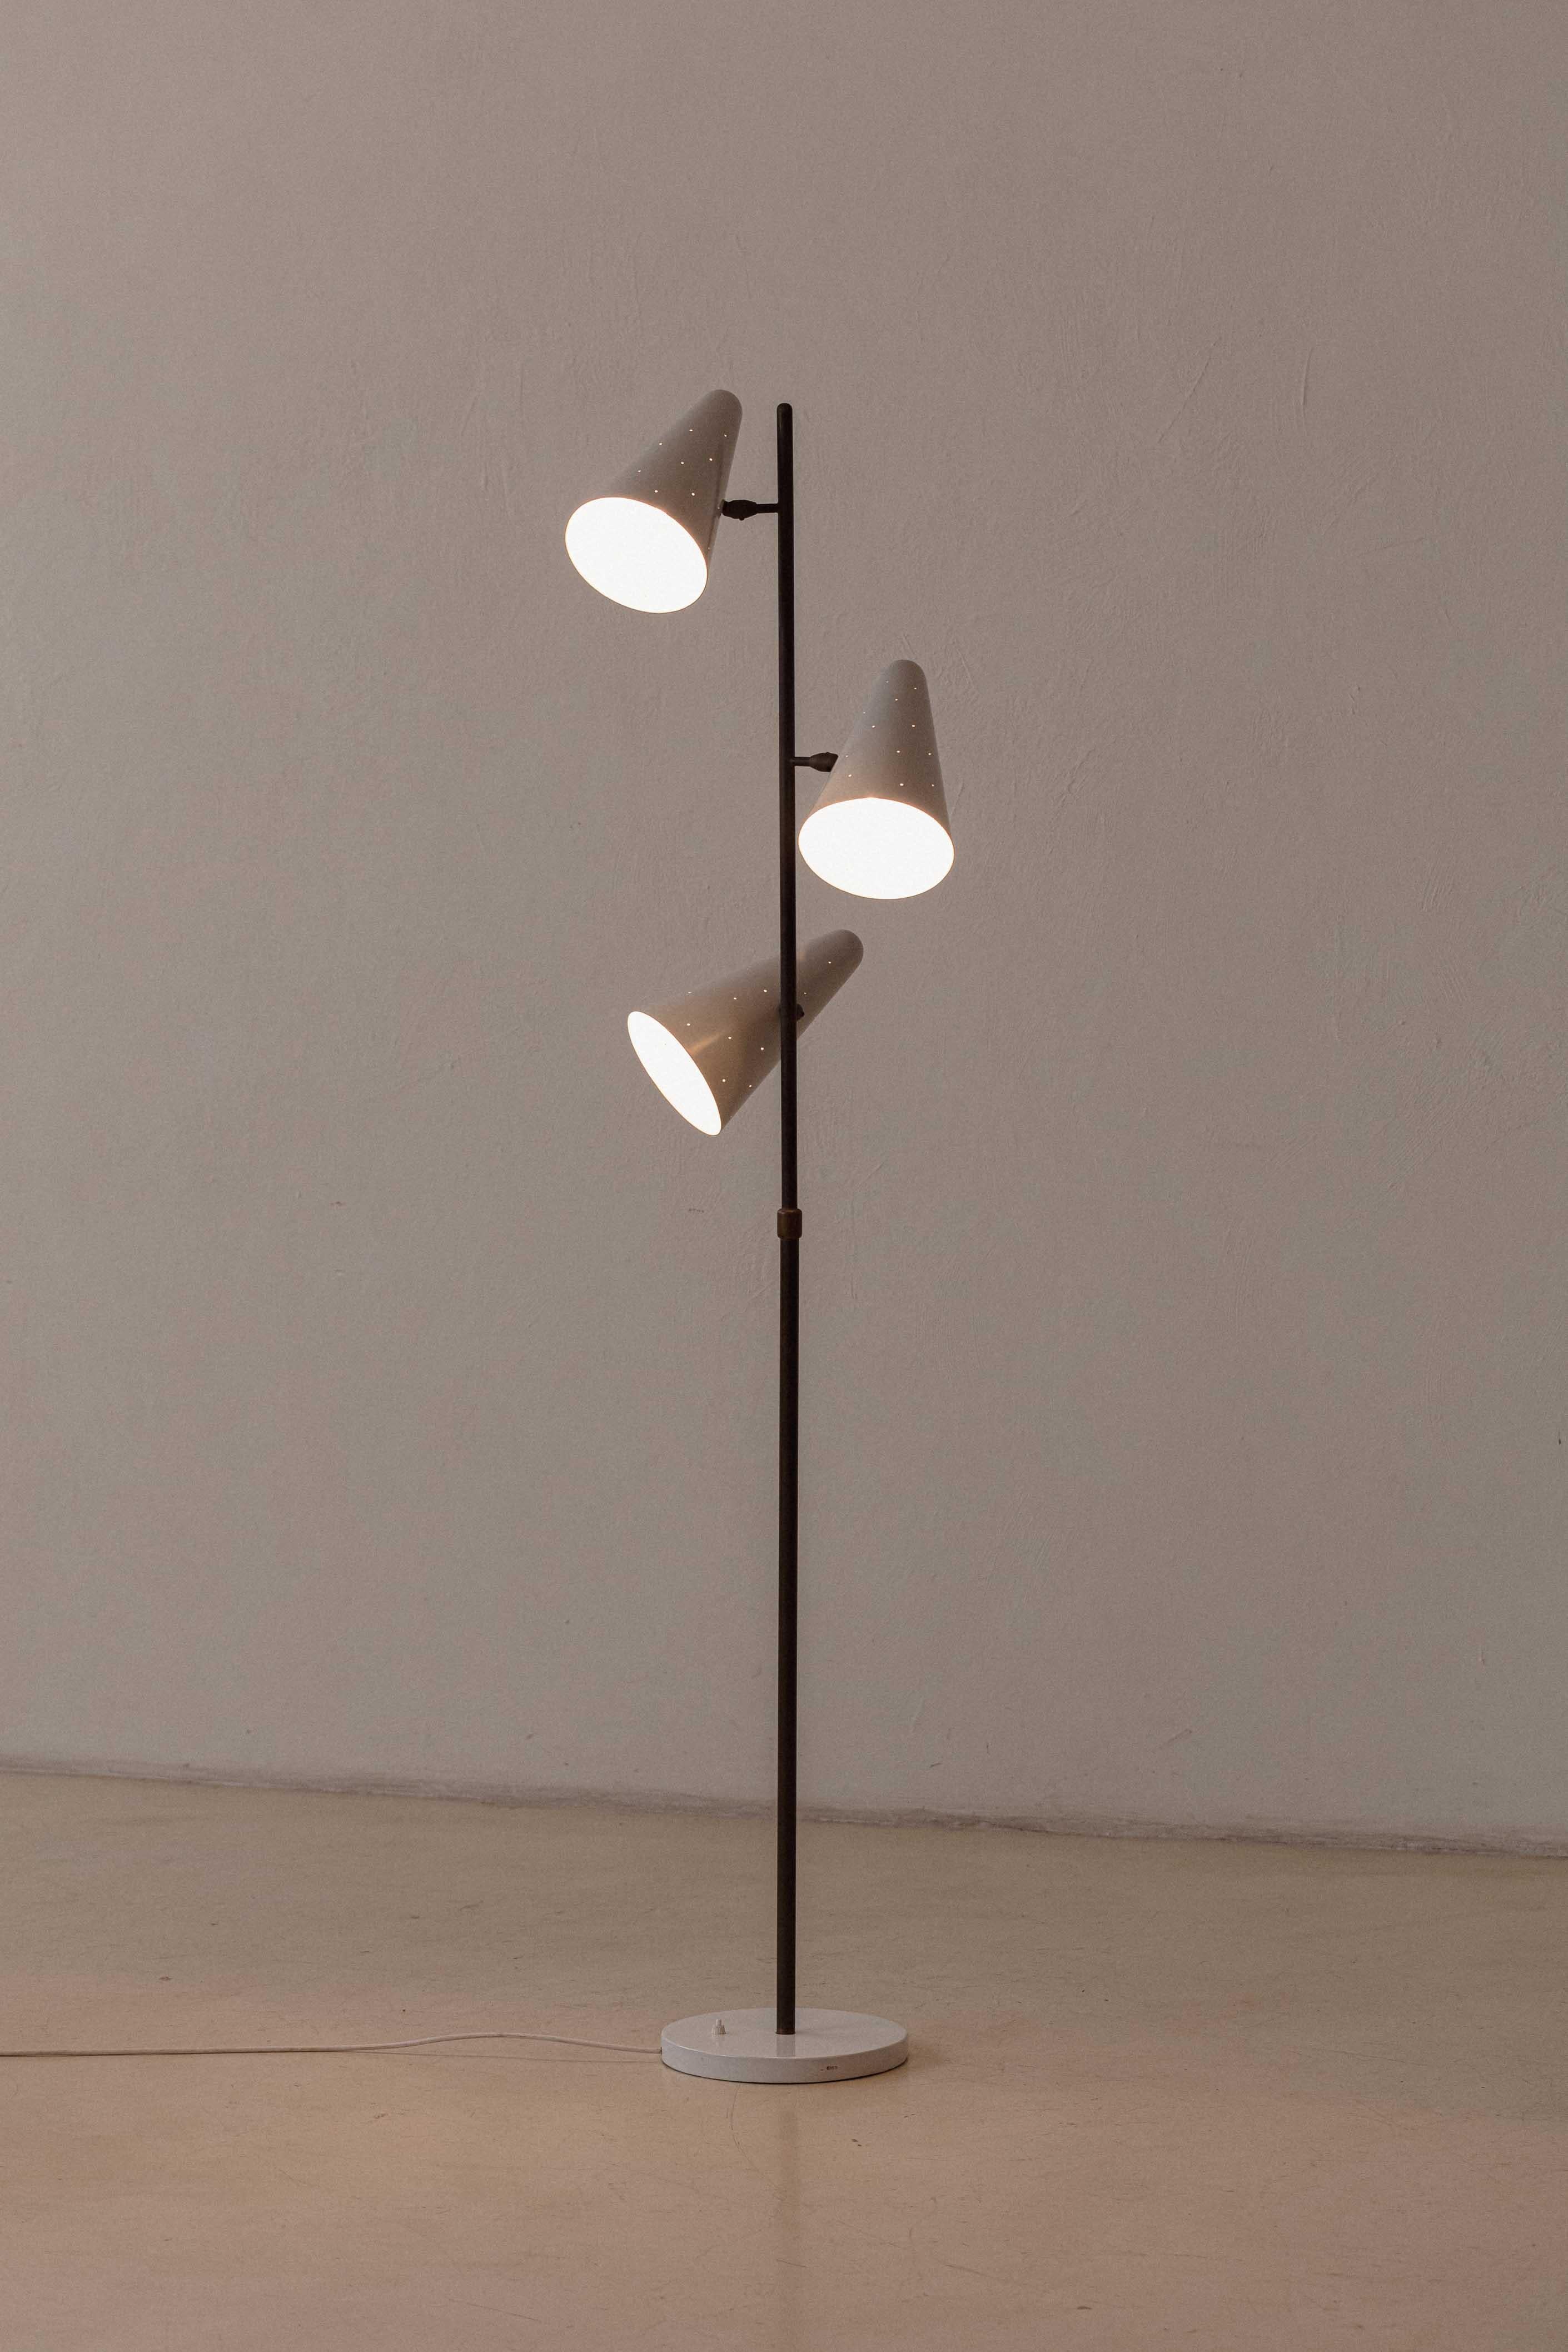 Mid-Century Modern Floor Lamp, Design Attributed to Martin Eisler, Forma S.A., Brazil, 1950s For Sale